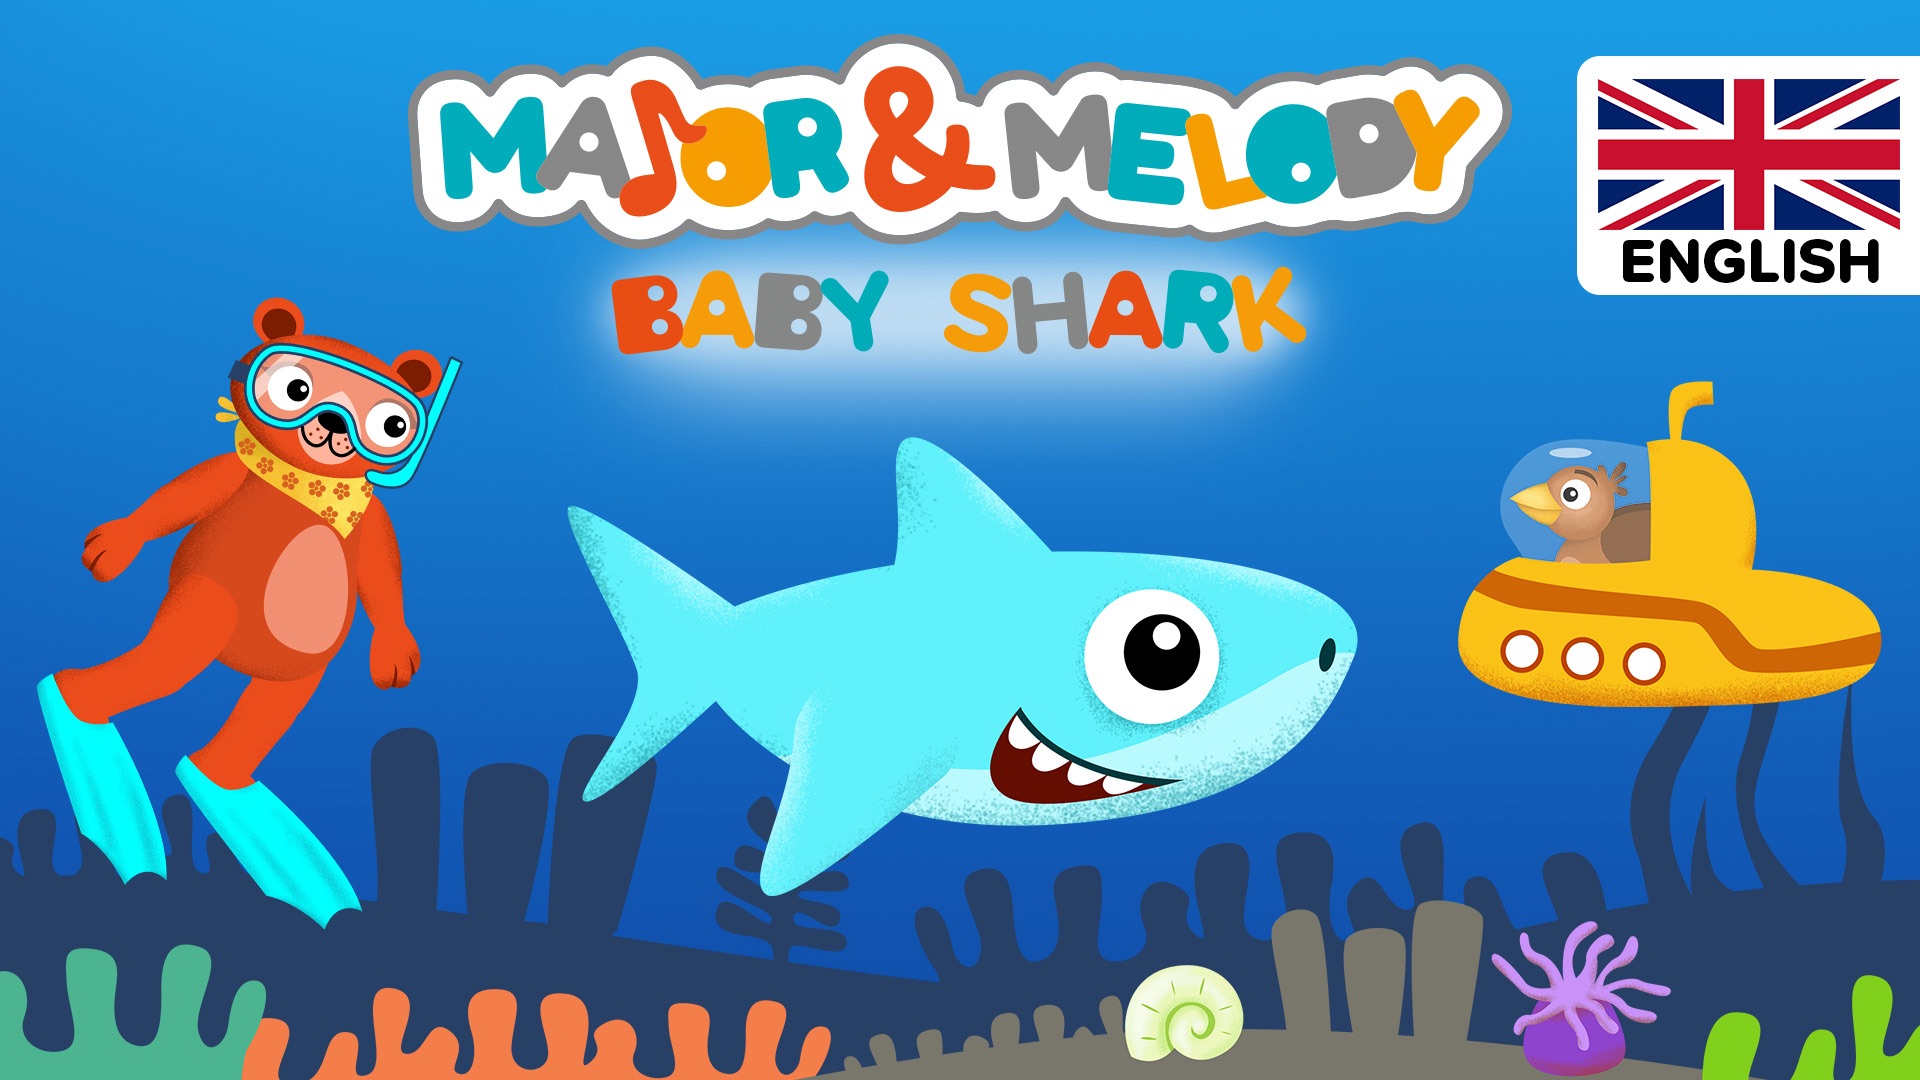 Baby shark (Nursery Rhymes for Kids / UK Version) by Major & Melody on  Apple Music